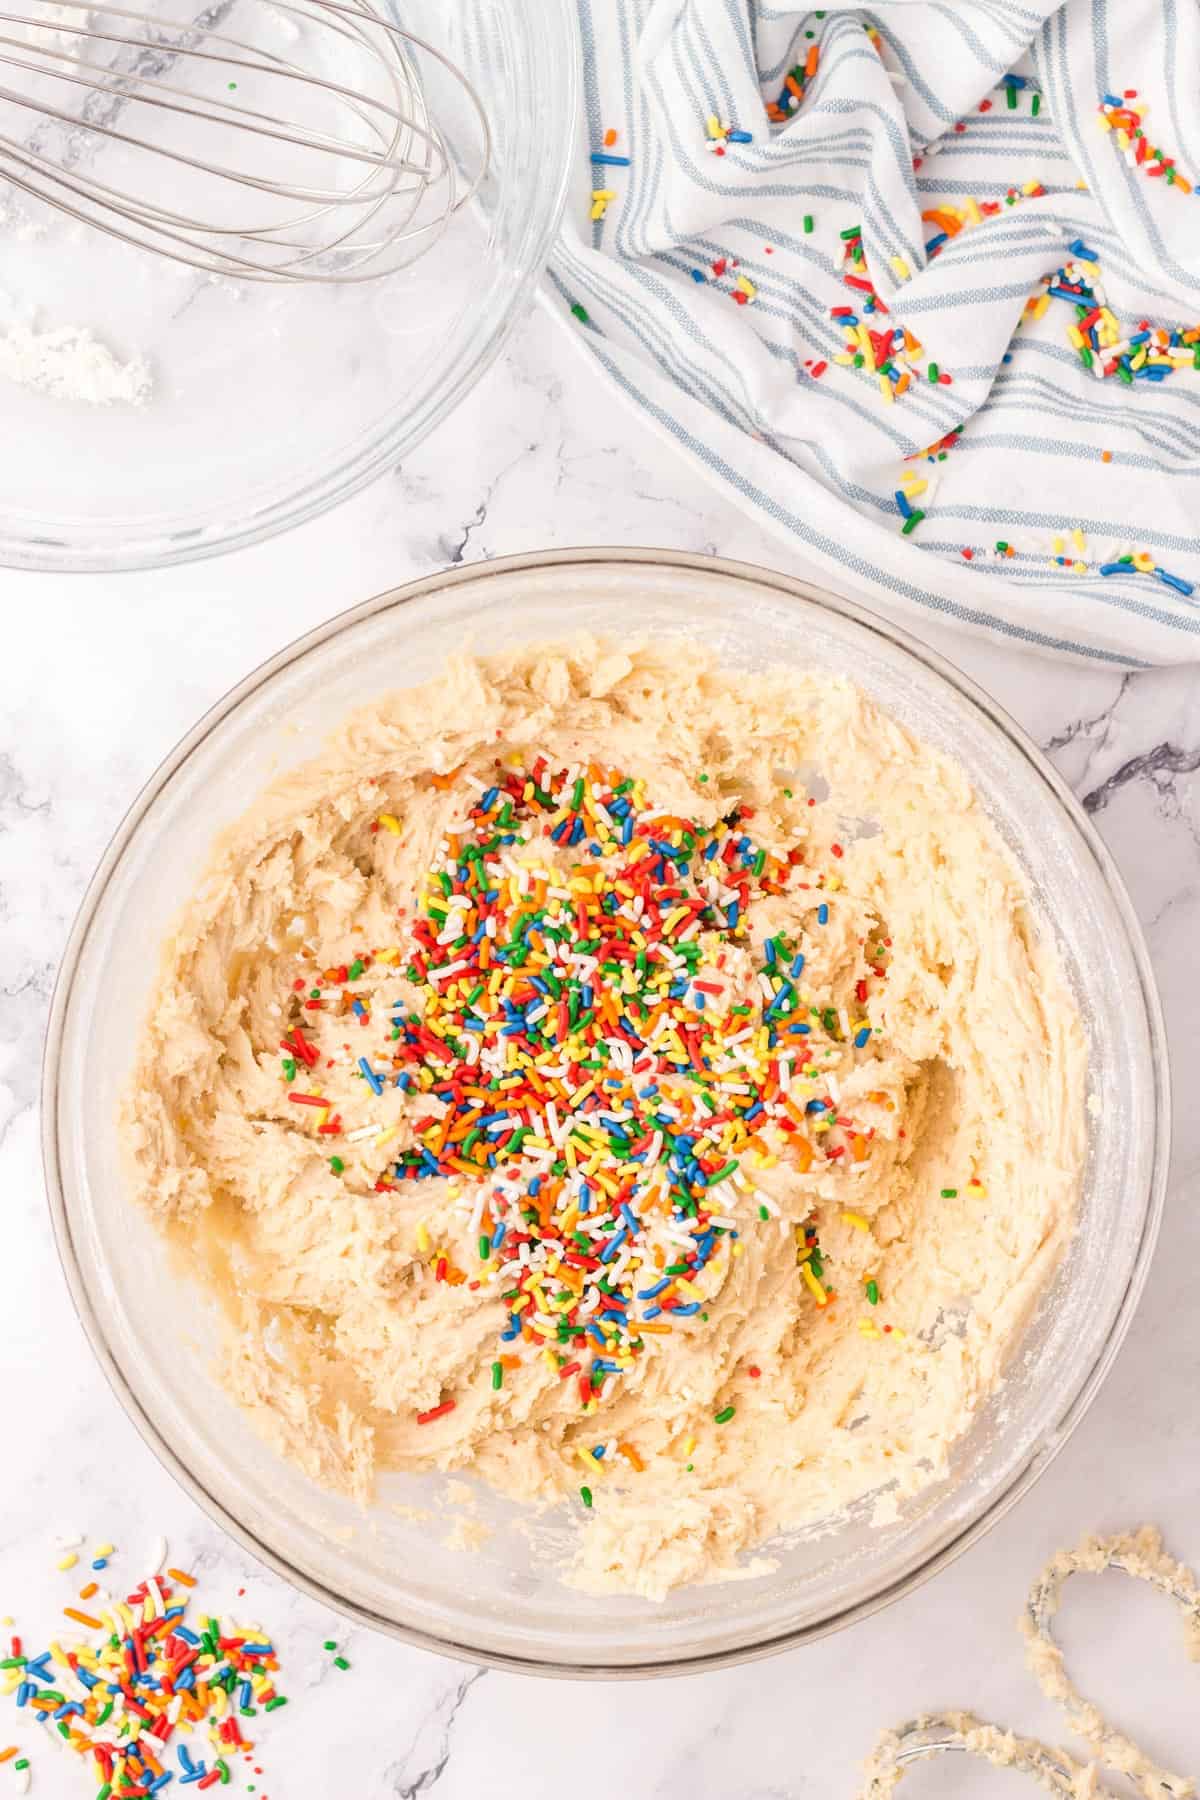 Rainbow sprinkles added to the sugar cookie dough.